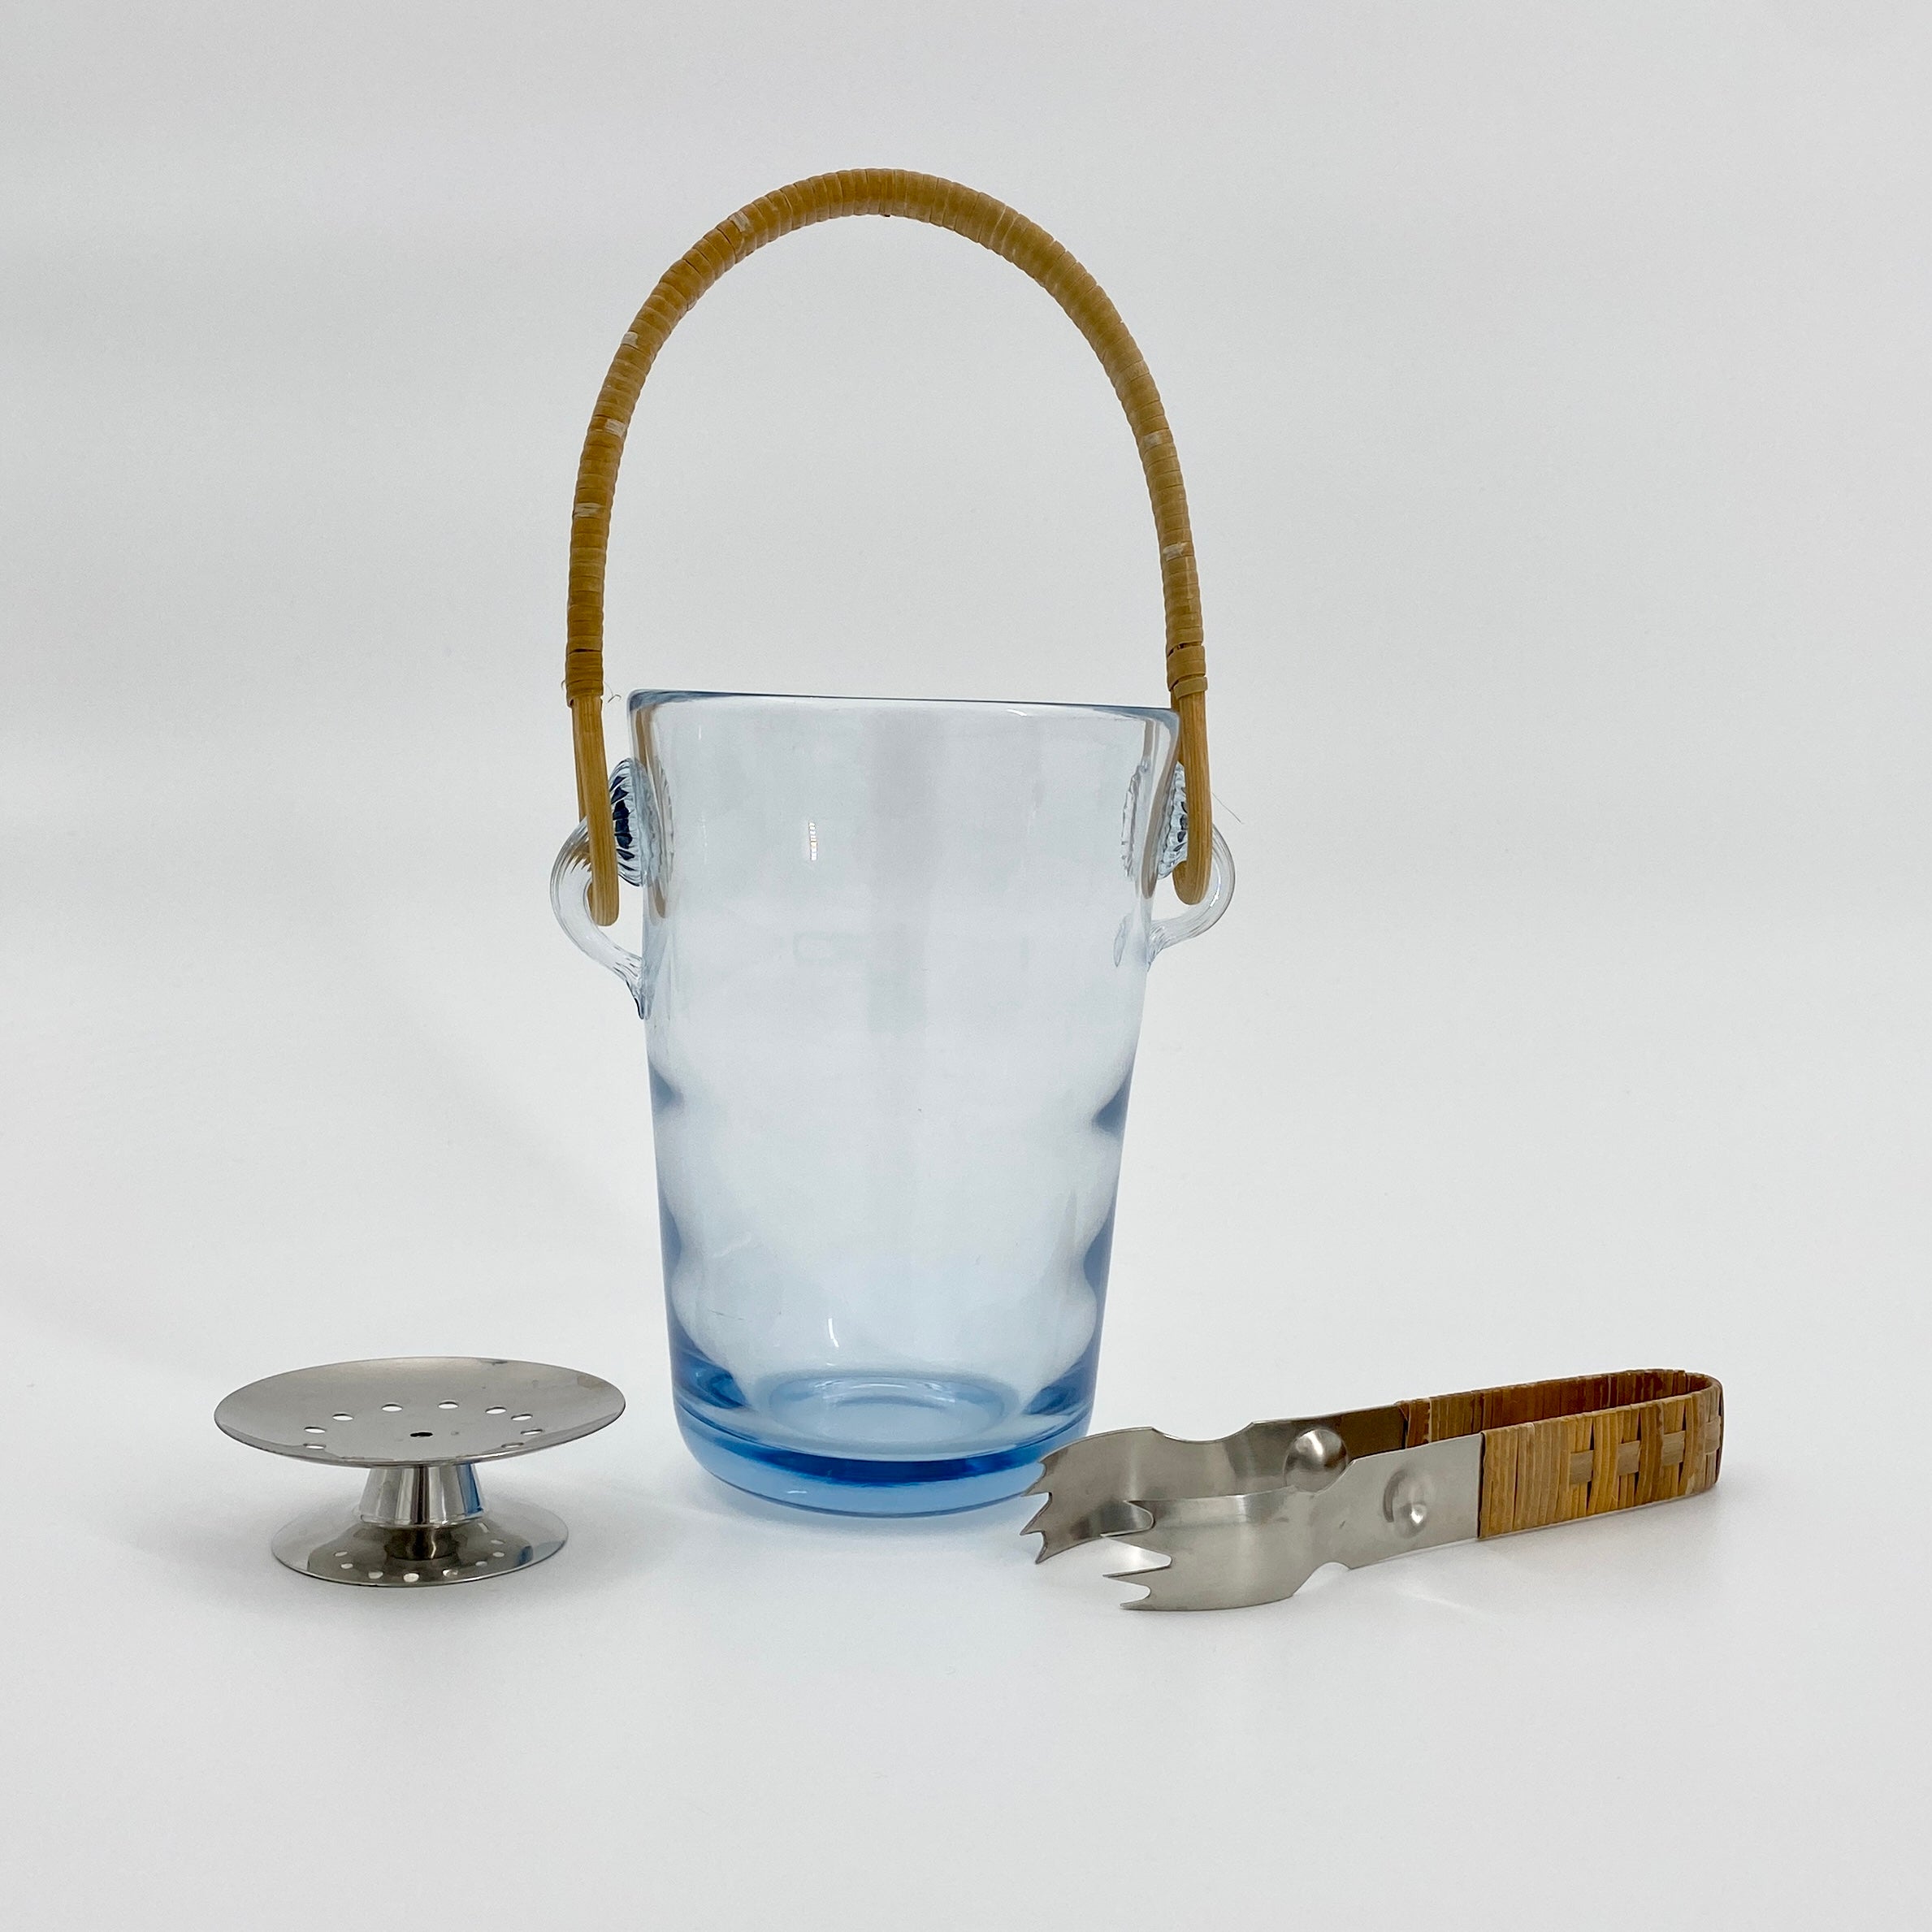 Scandinavian Modern Glass Ice Bucket by Jacob Bang For Holmegaard, circa 1930. This glass ice bucket is signed “HOLMEGAARD ??8715